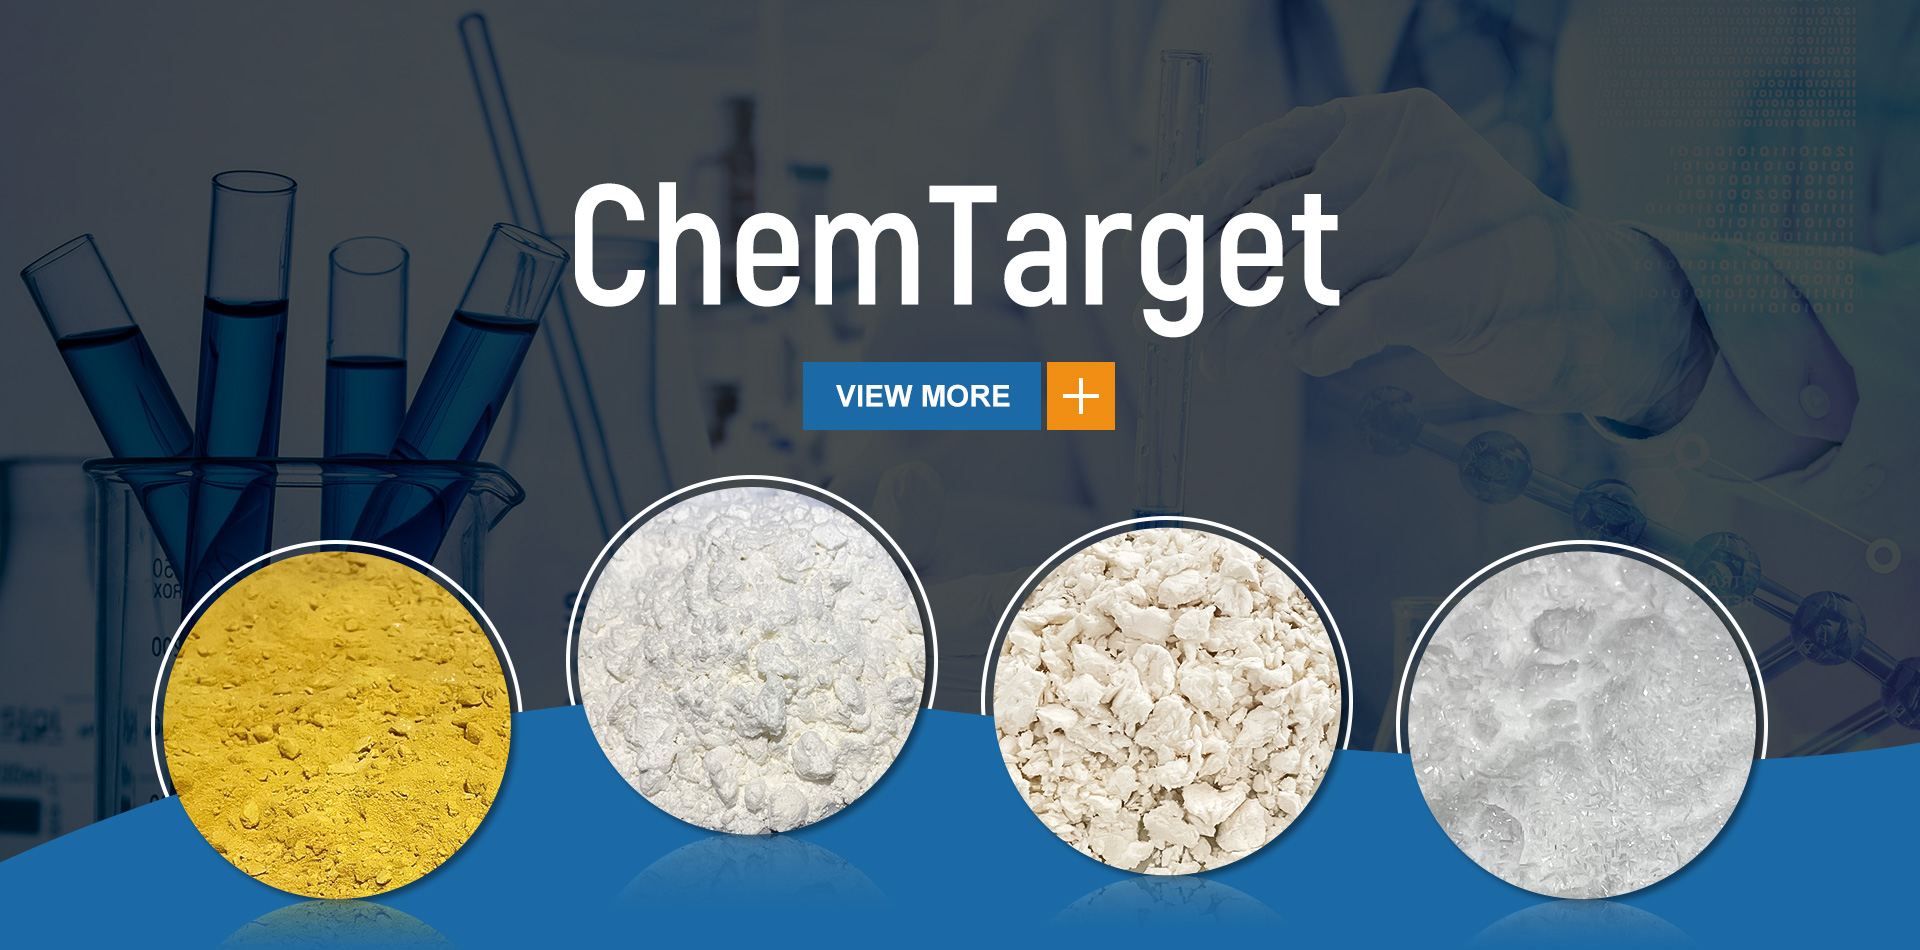 Chemtarget Technologies Co., Ltd.